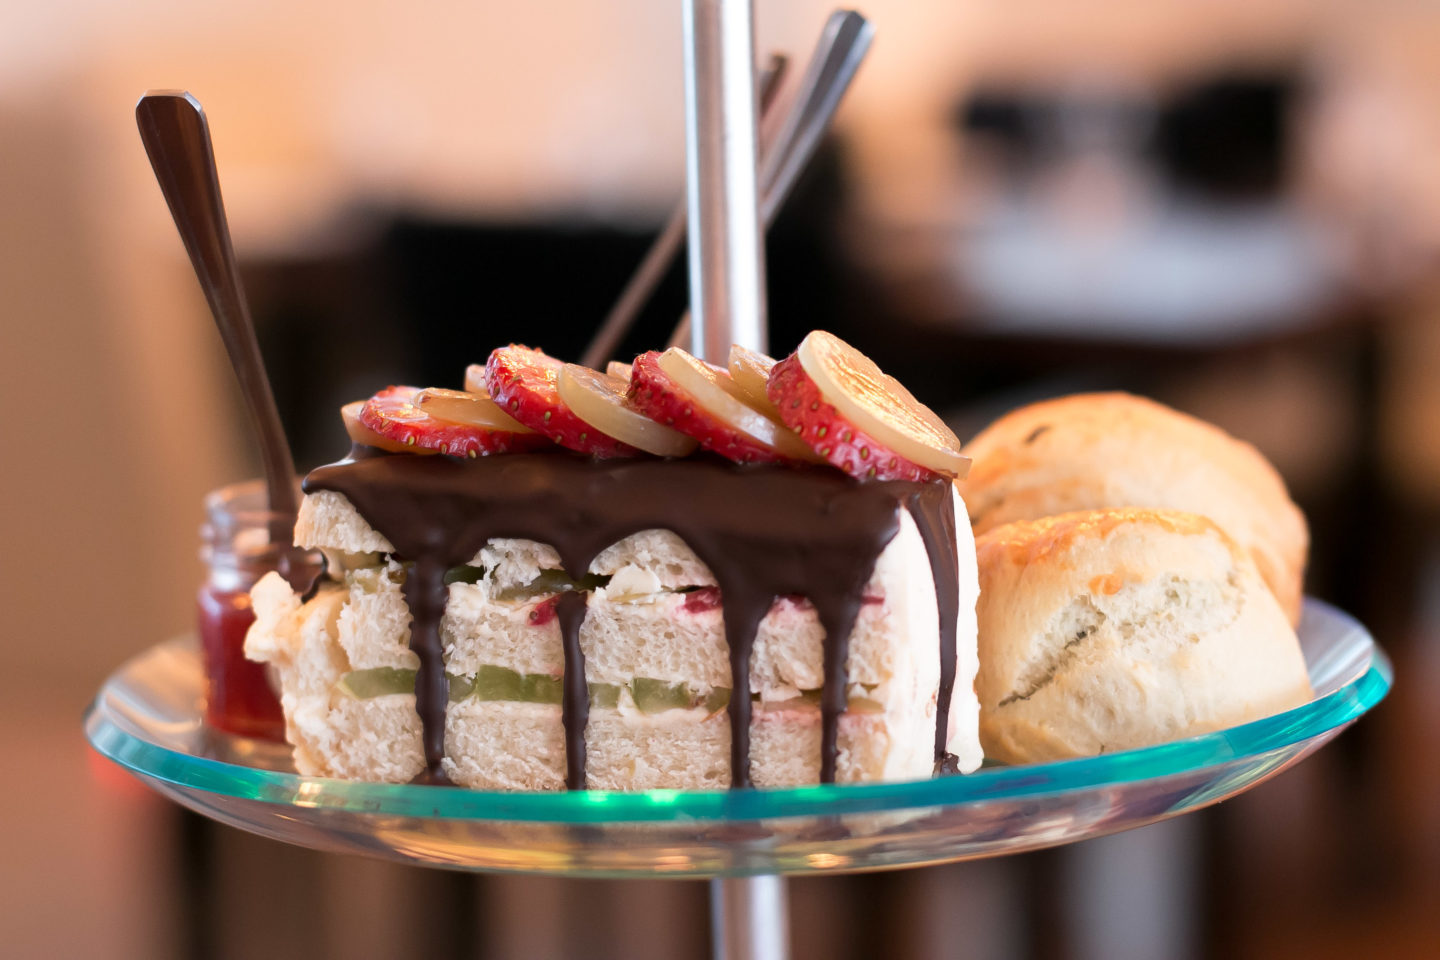 Jordan Taylor C - Embracing Rock n' Roll w/ the K West Hotel and Spa's Afternoon Tea